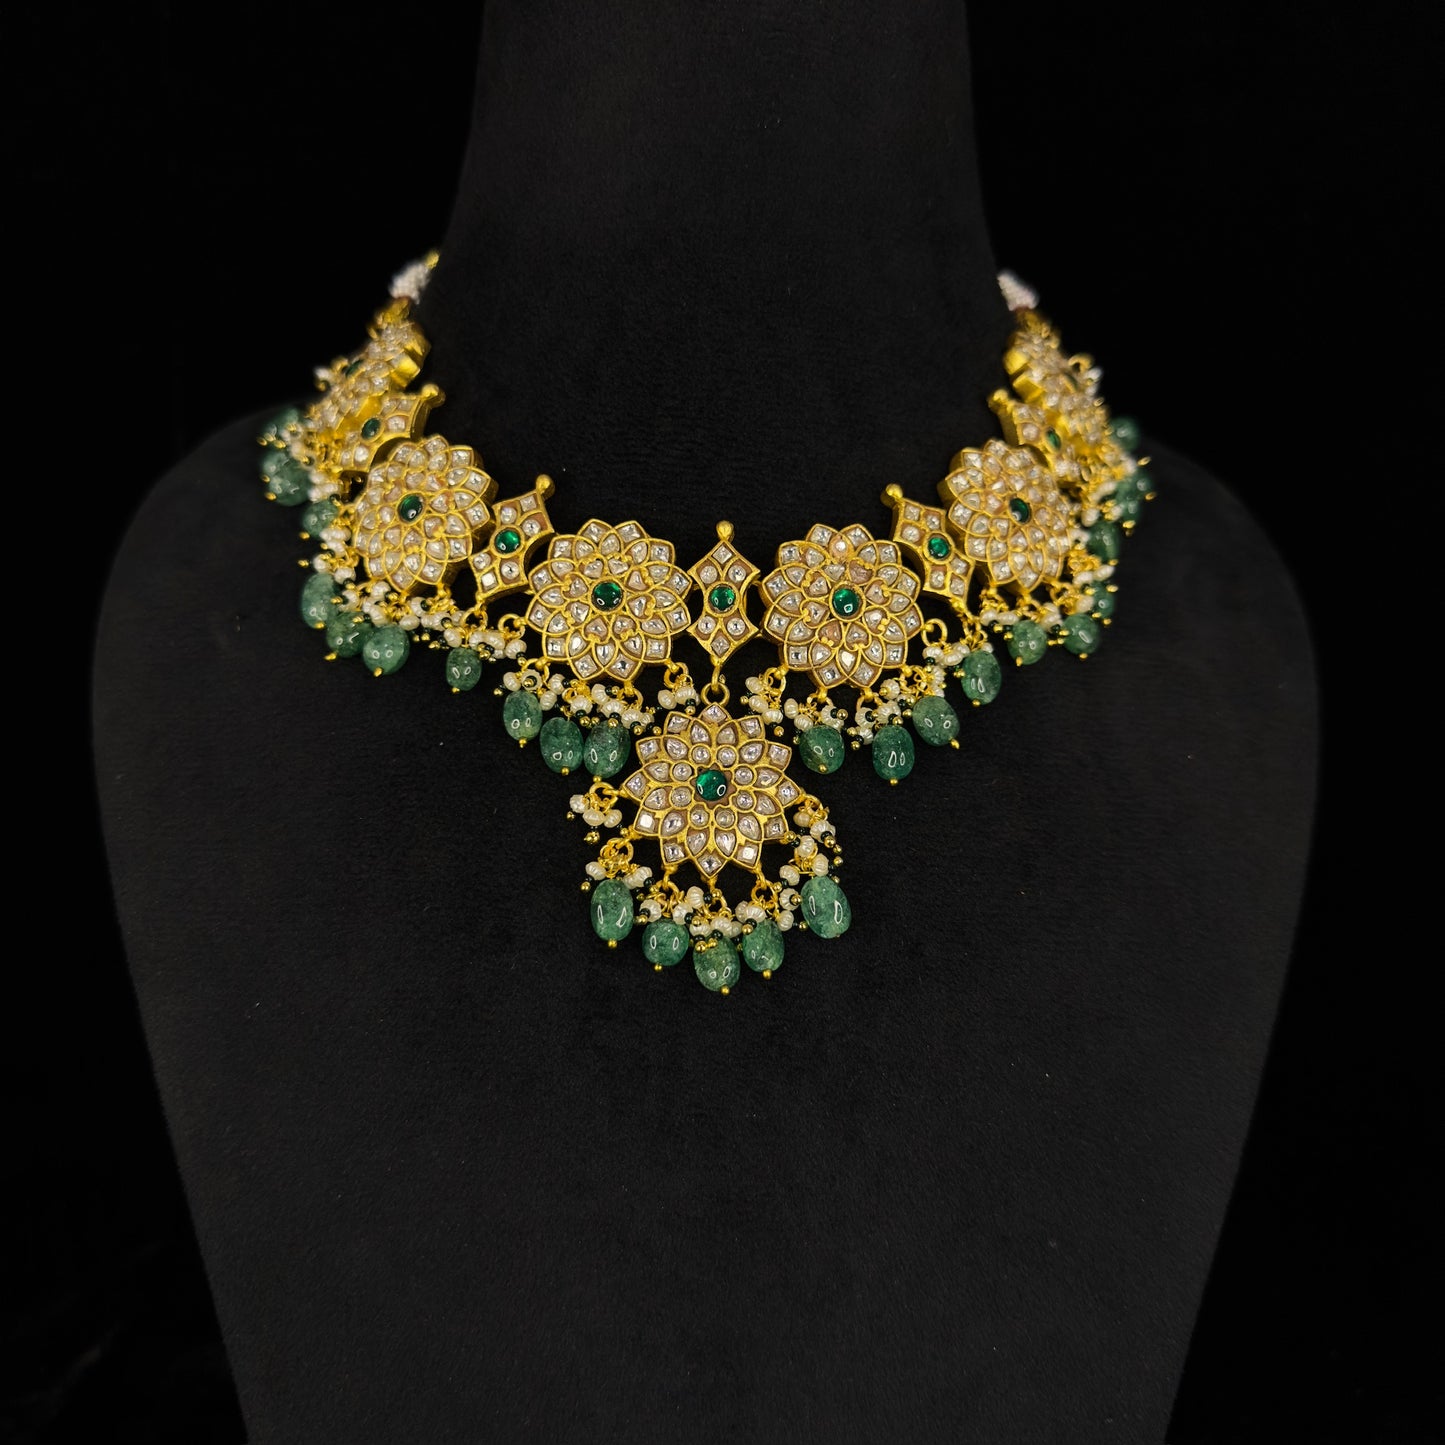 Here is A short Jadau Kundan bottumala necklace with floral design. This necklace has white Kundan stones and green stones in the middle of flowers. This piece is covered with 22k gold plating.